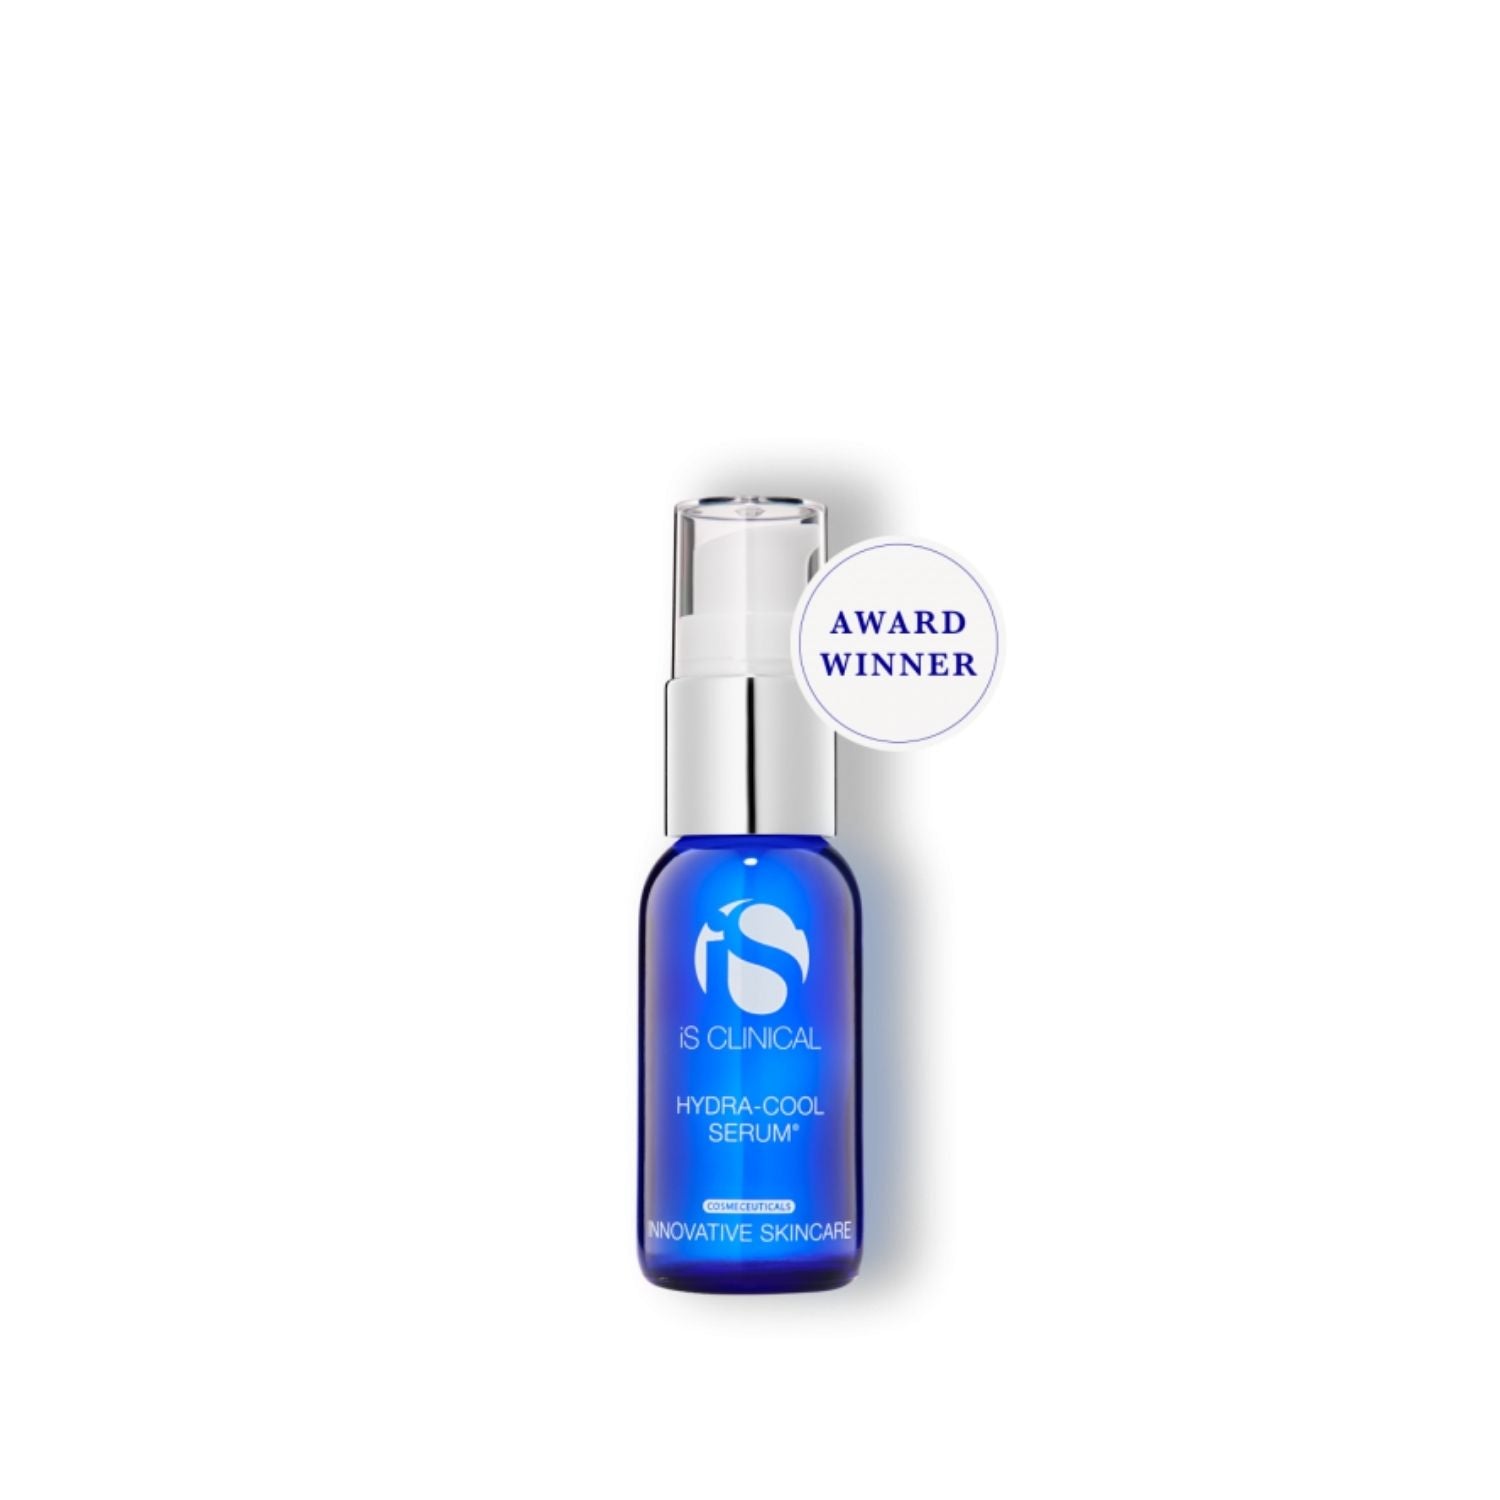 iS Clinical Hydra Cool Serum 15ml - Dr. Pen Store - iS Clinical Buy Genuine Dr Pen Products with Trust